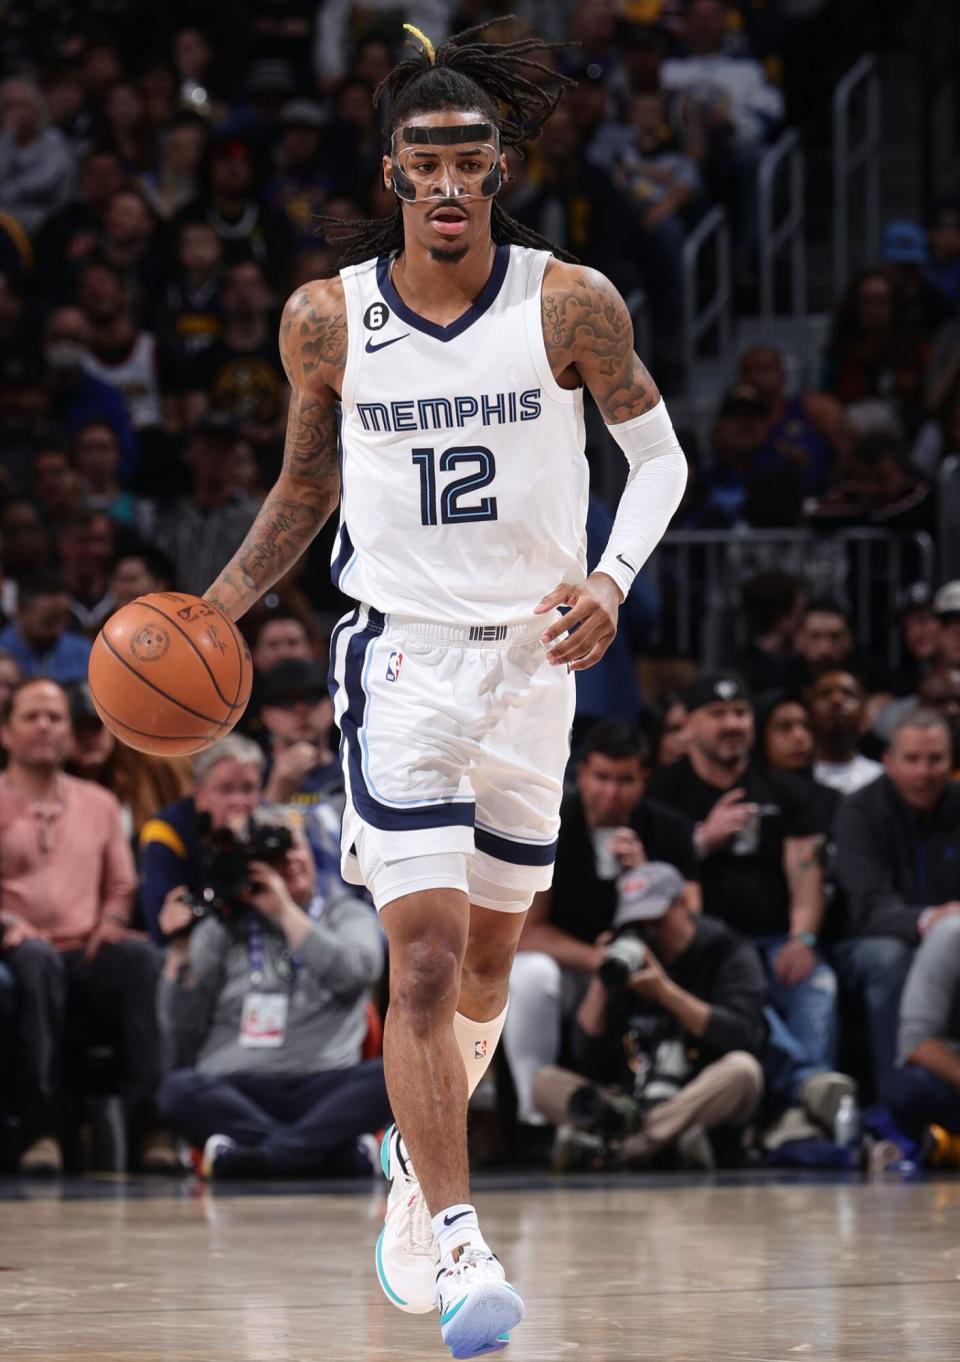 Ja Morant #12 of the Memphis Grizzlies dribbles the ball during the game against the Denver Nuggets on March 3, 2023